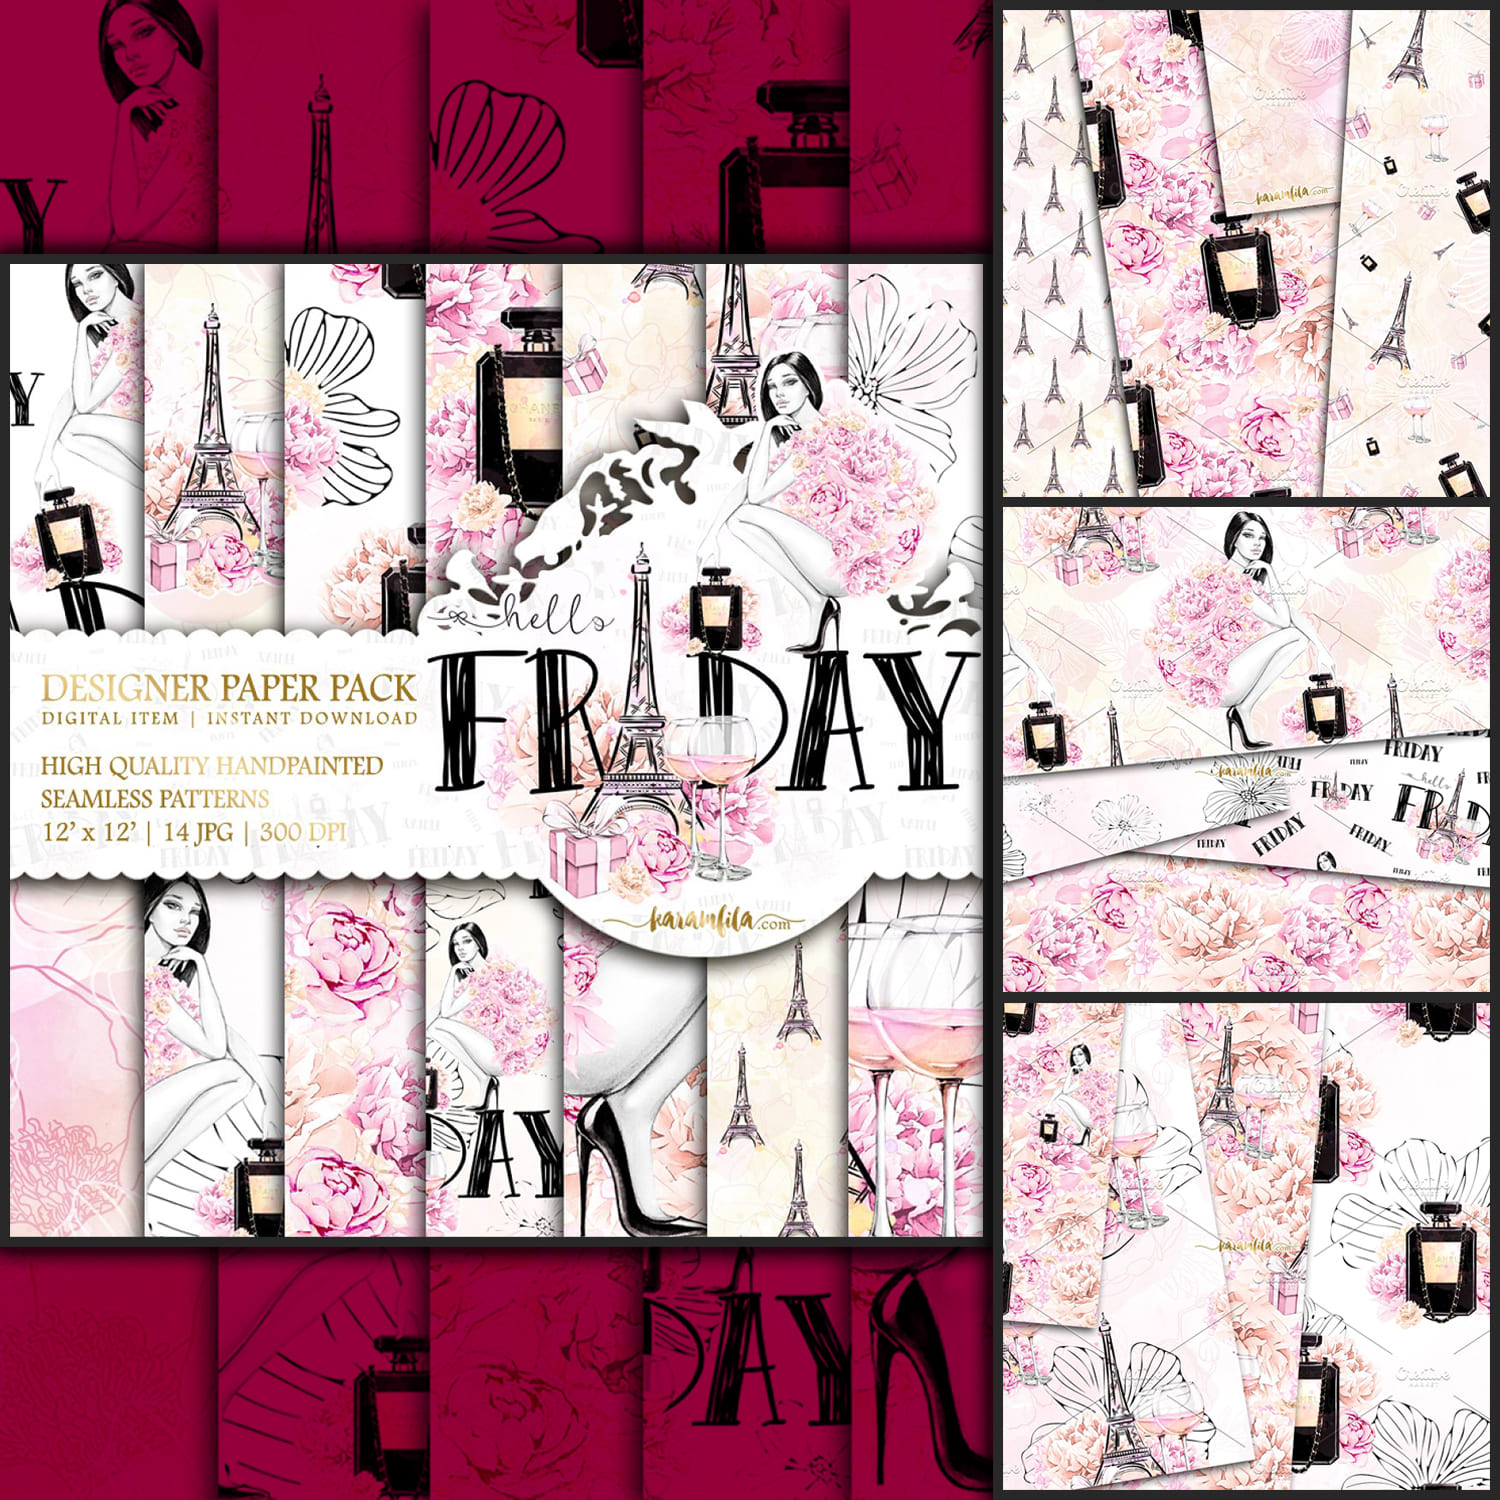 High quality handpainted seamless patterns about Paris and love.